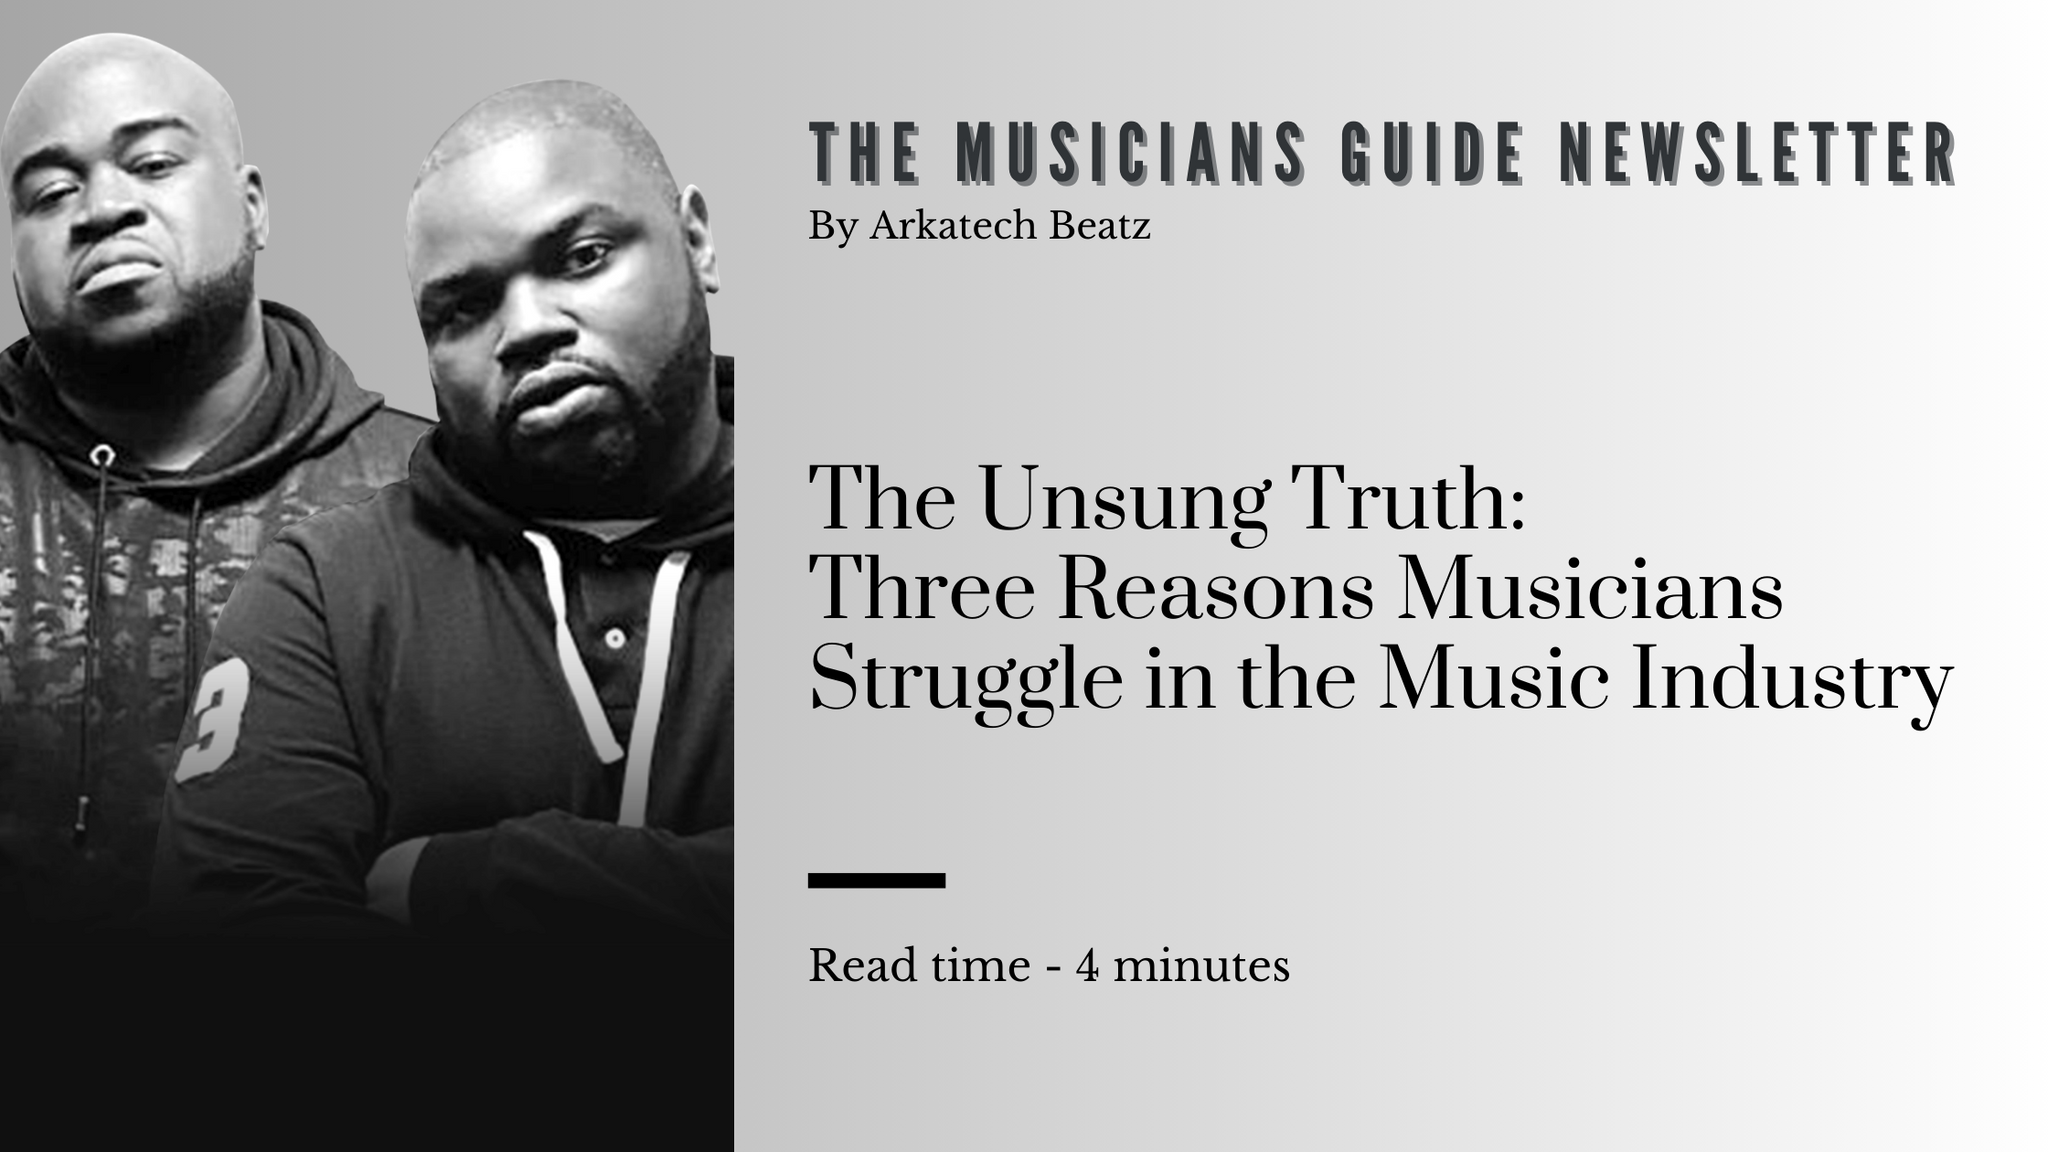 The Unsung Truth: Three Reasons Musicians Struggle in the Music Industry